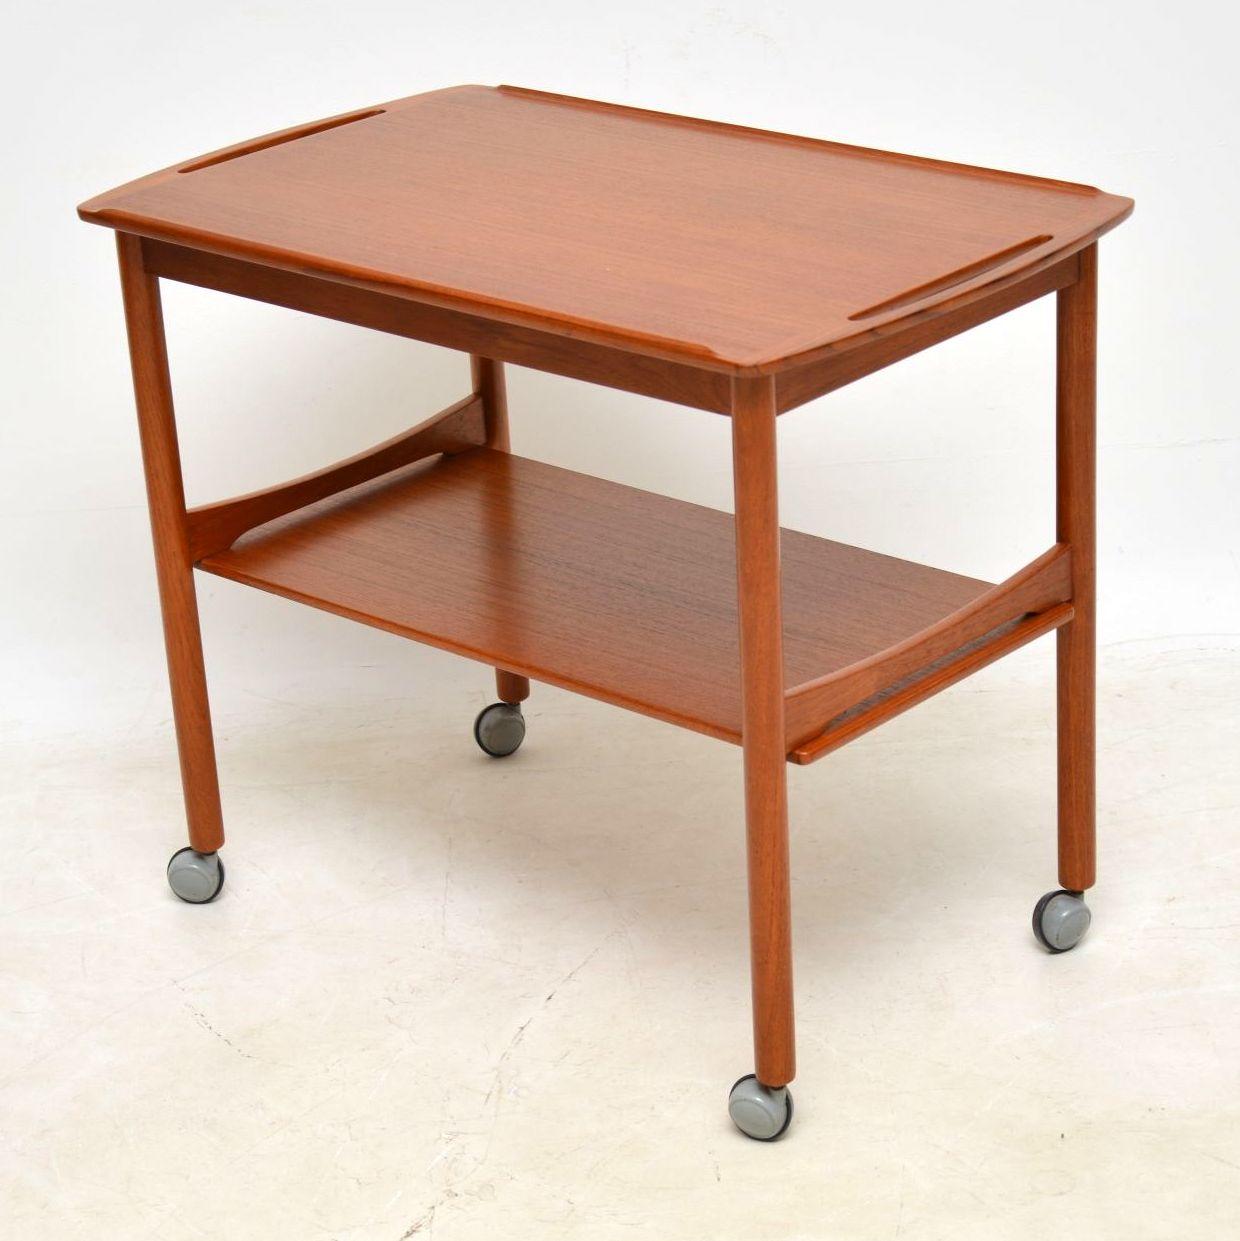 1960's Danish Vintage Teak Drinks Trolley In Good Condition For Sale In London, GB